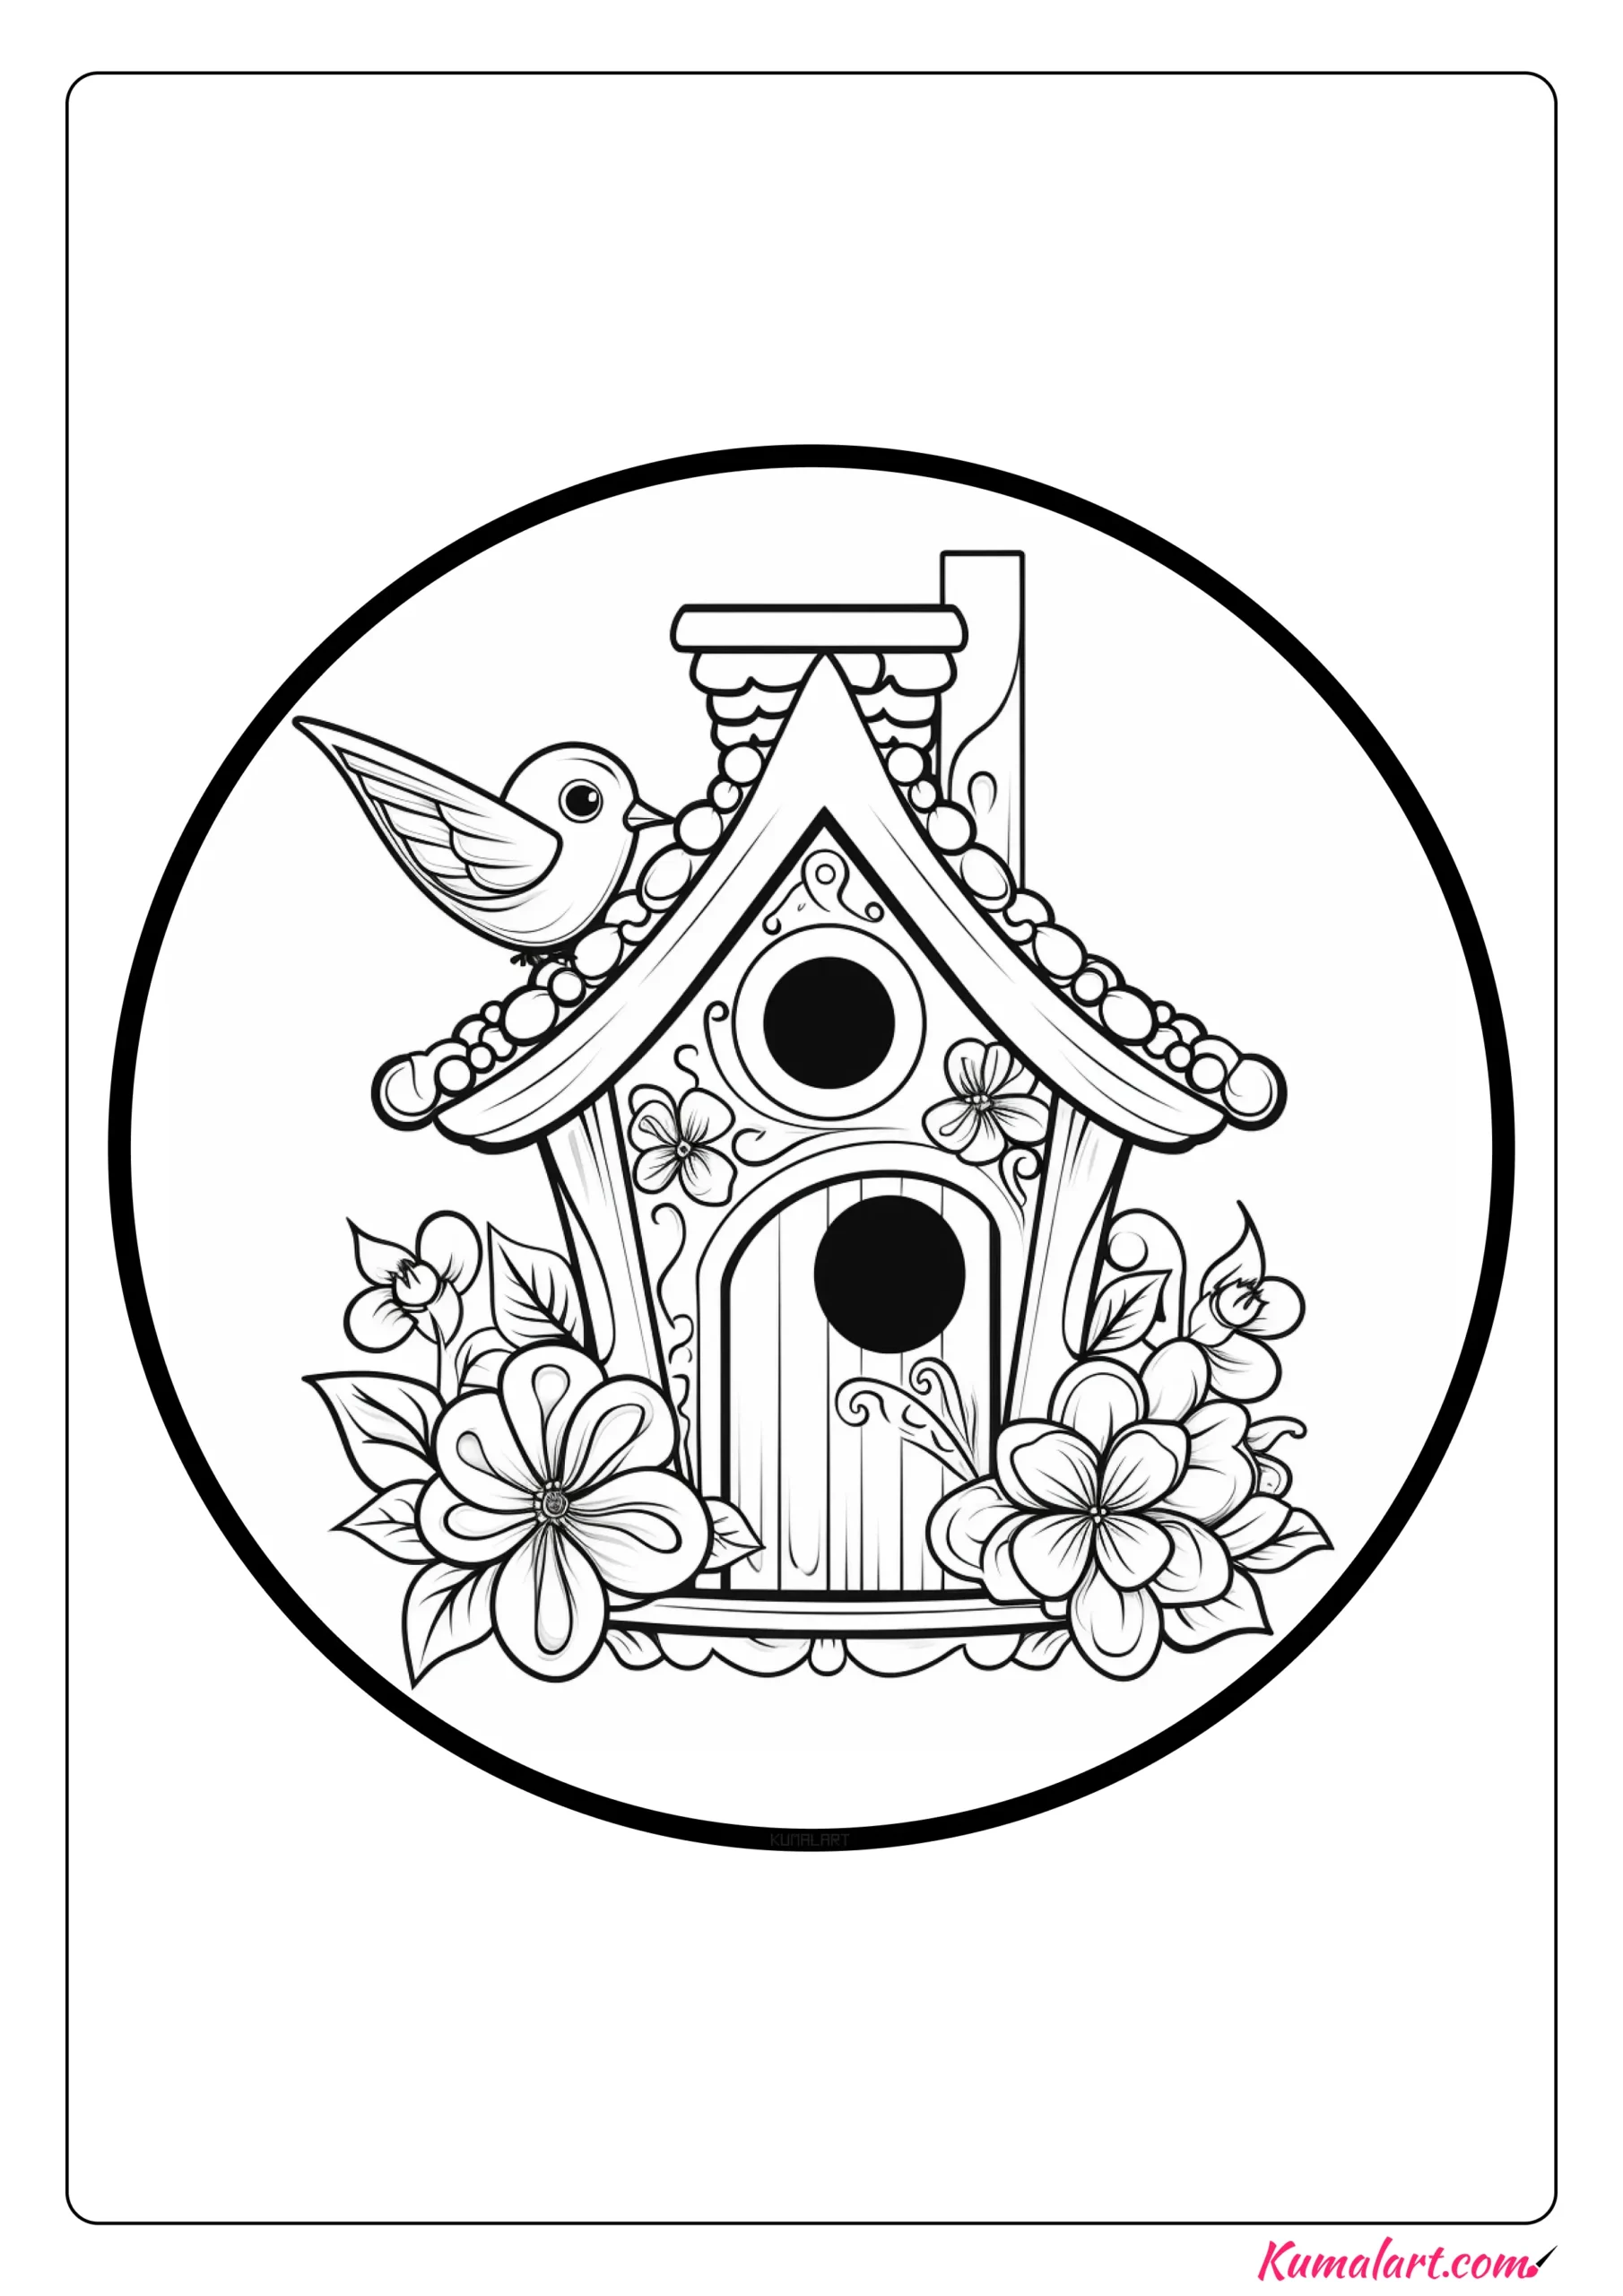 Flowery Birdhouse Coloring Page